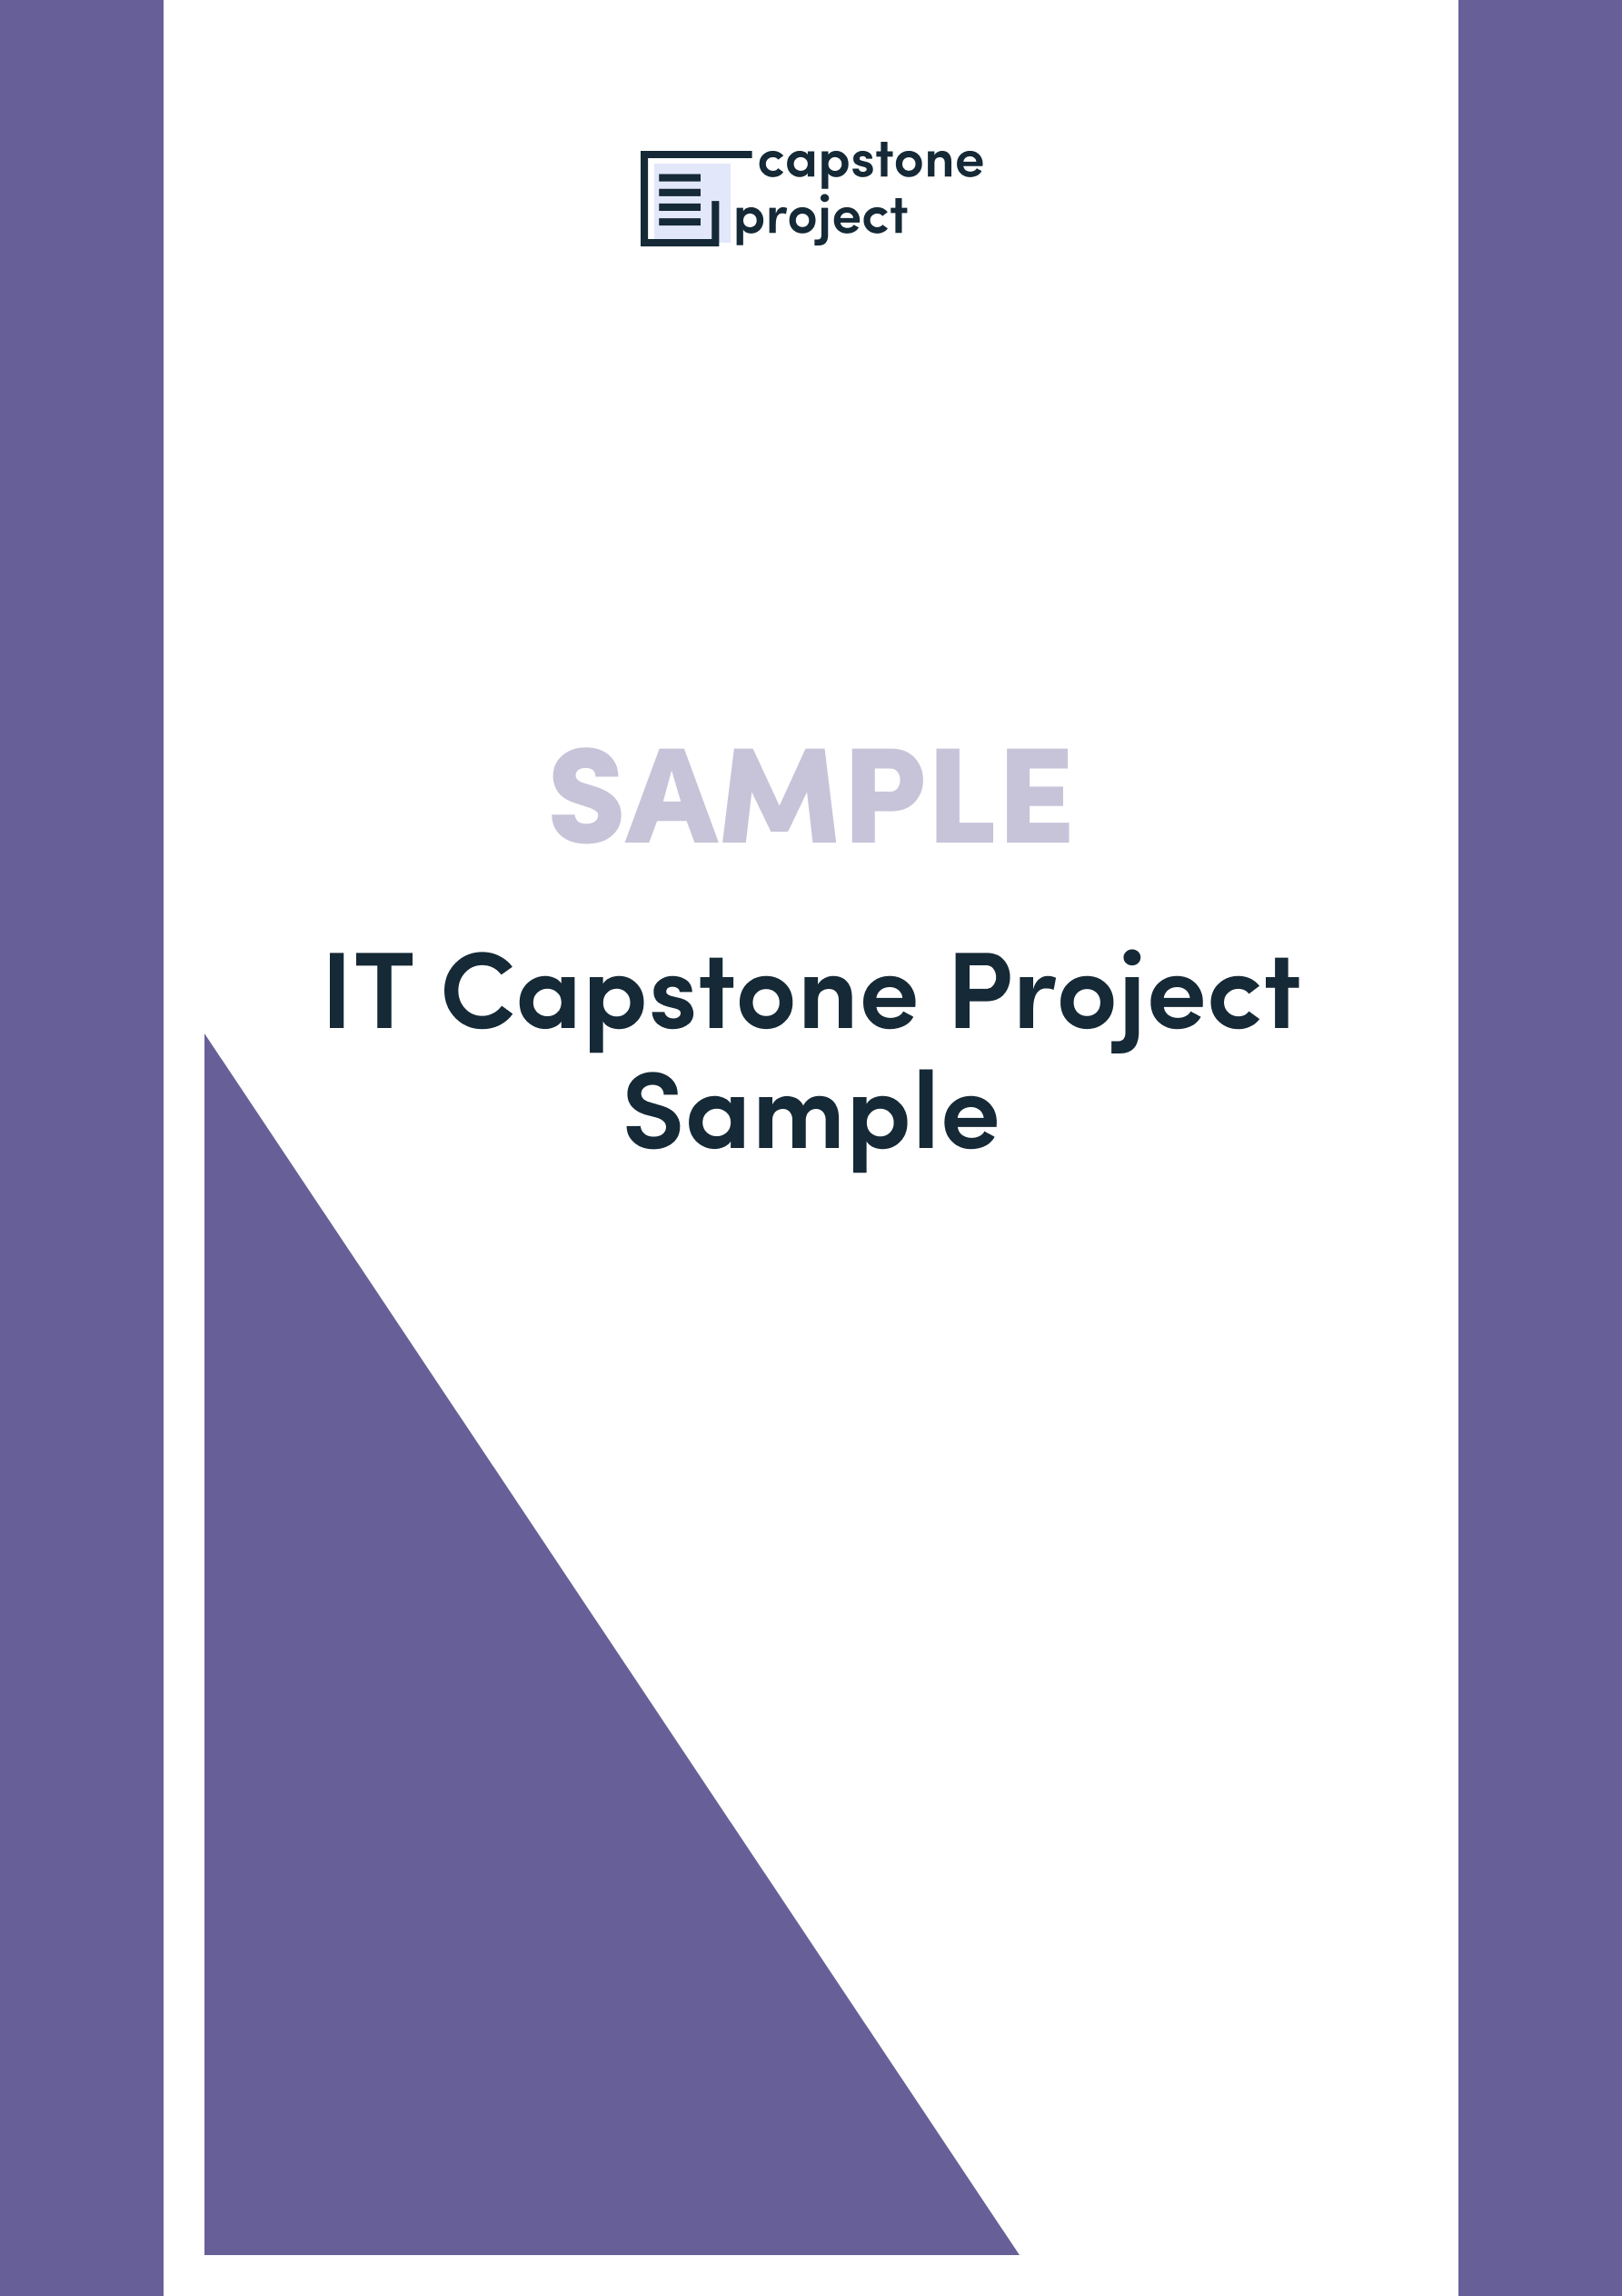 network capstone project examples